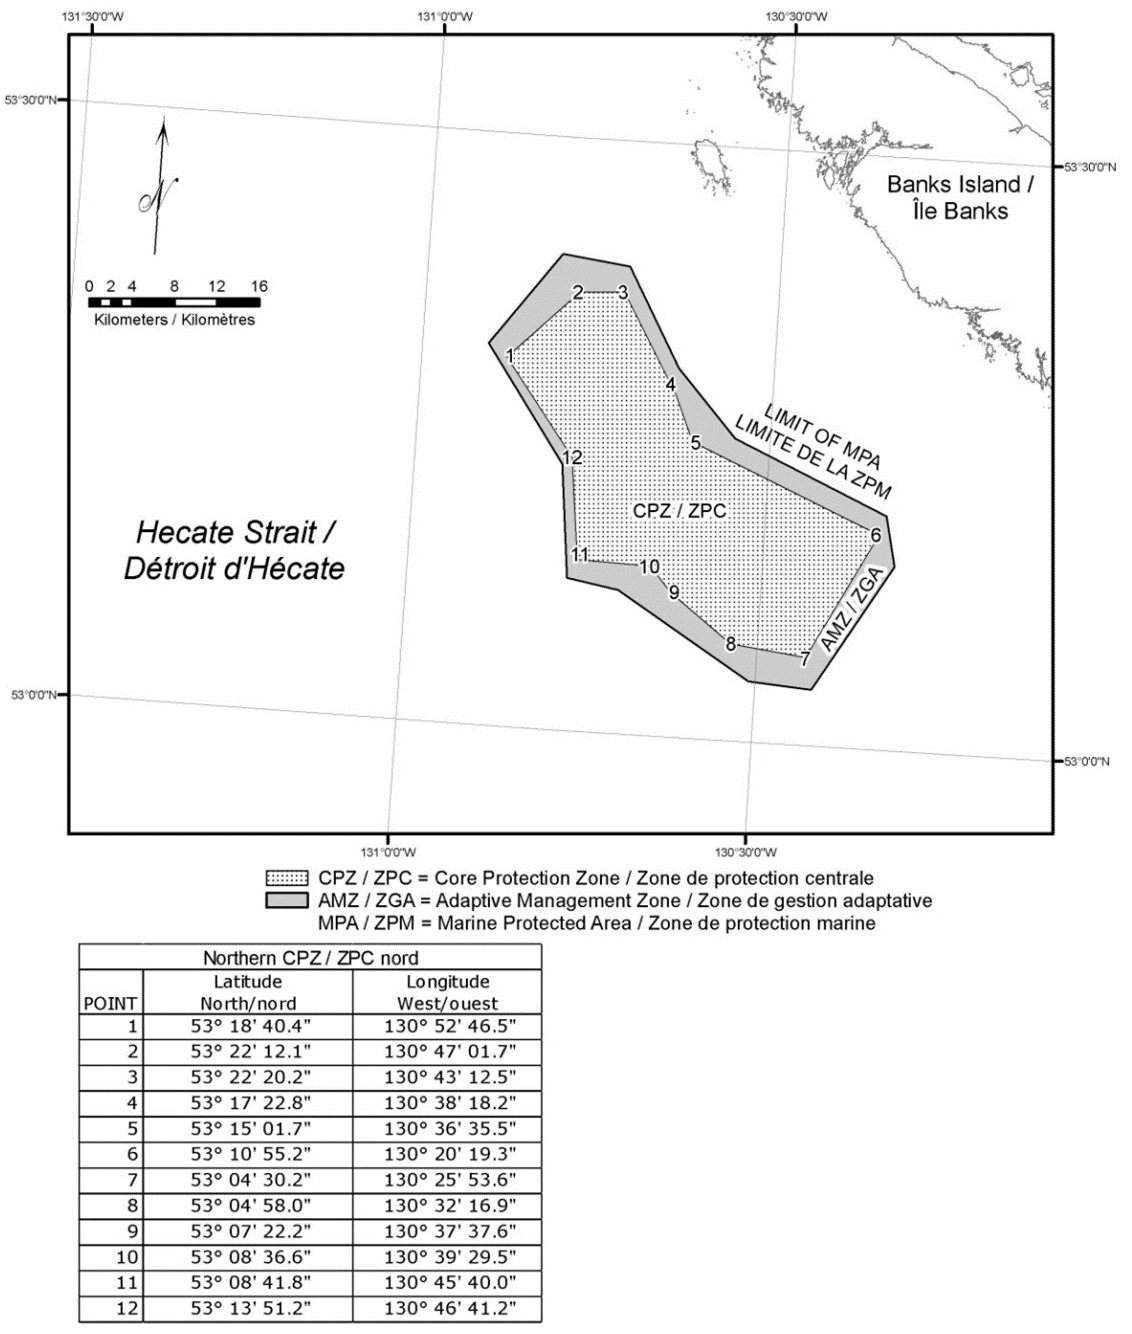 Map of the Northern Reef Marine Protected Area, depicting the core protection zone, adaptive management zone, and marine protected area in various shades of grey. The coordinates can be found on the bottom left corner.